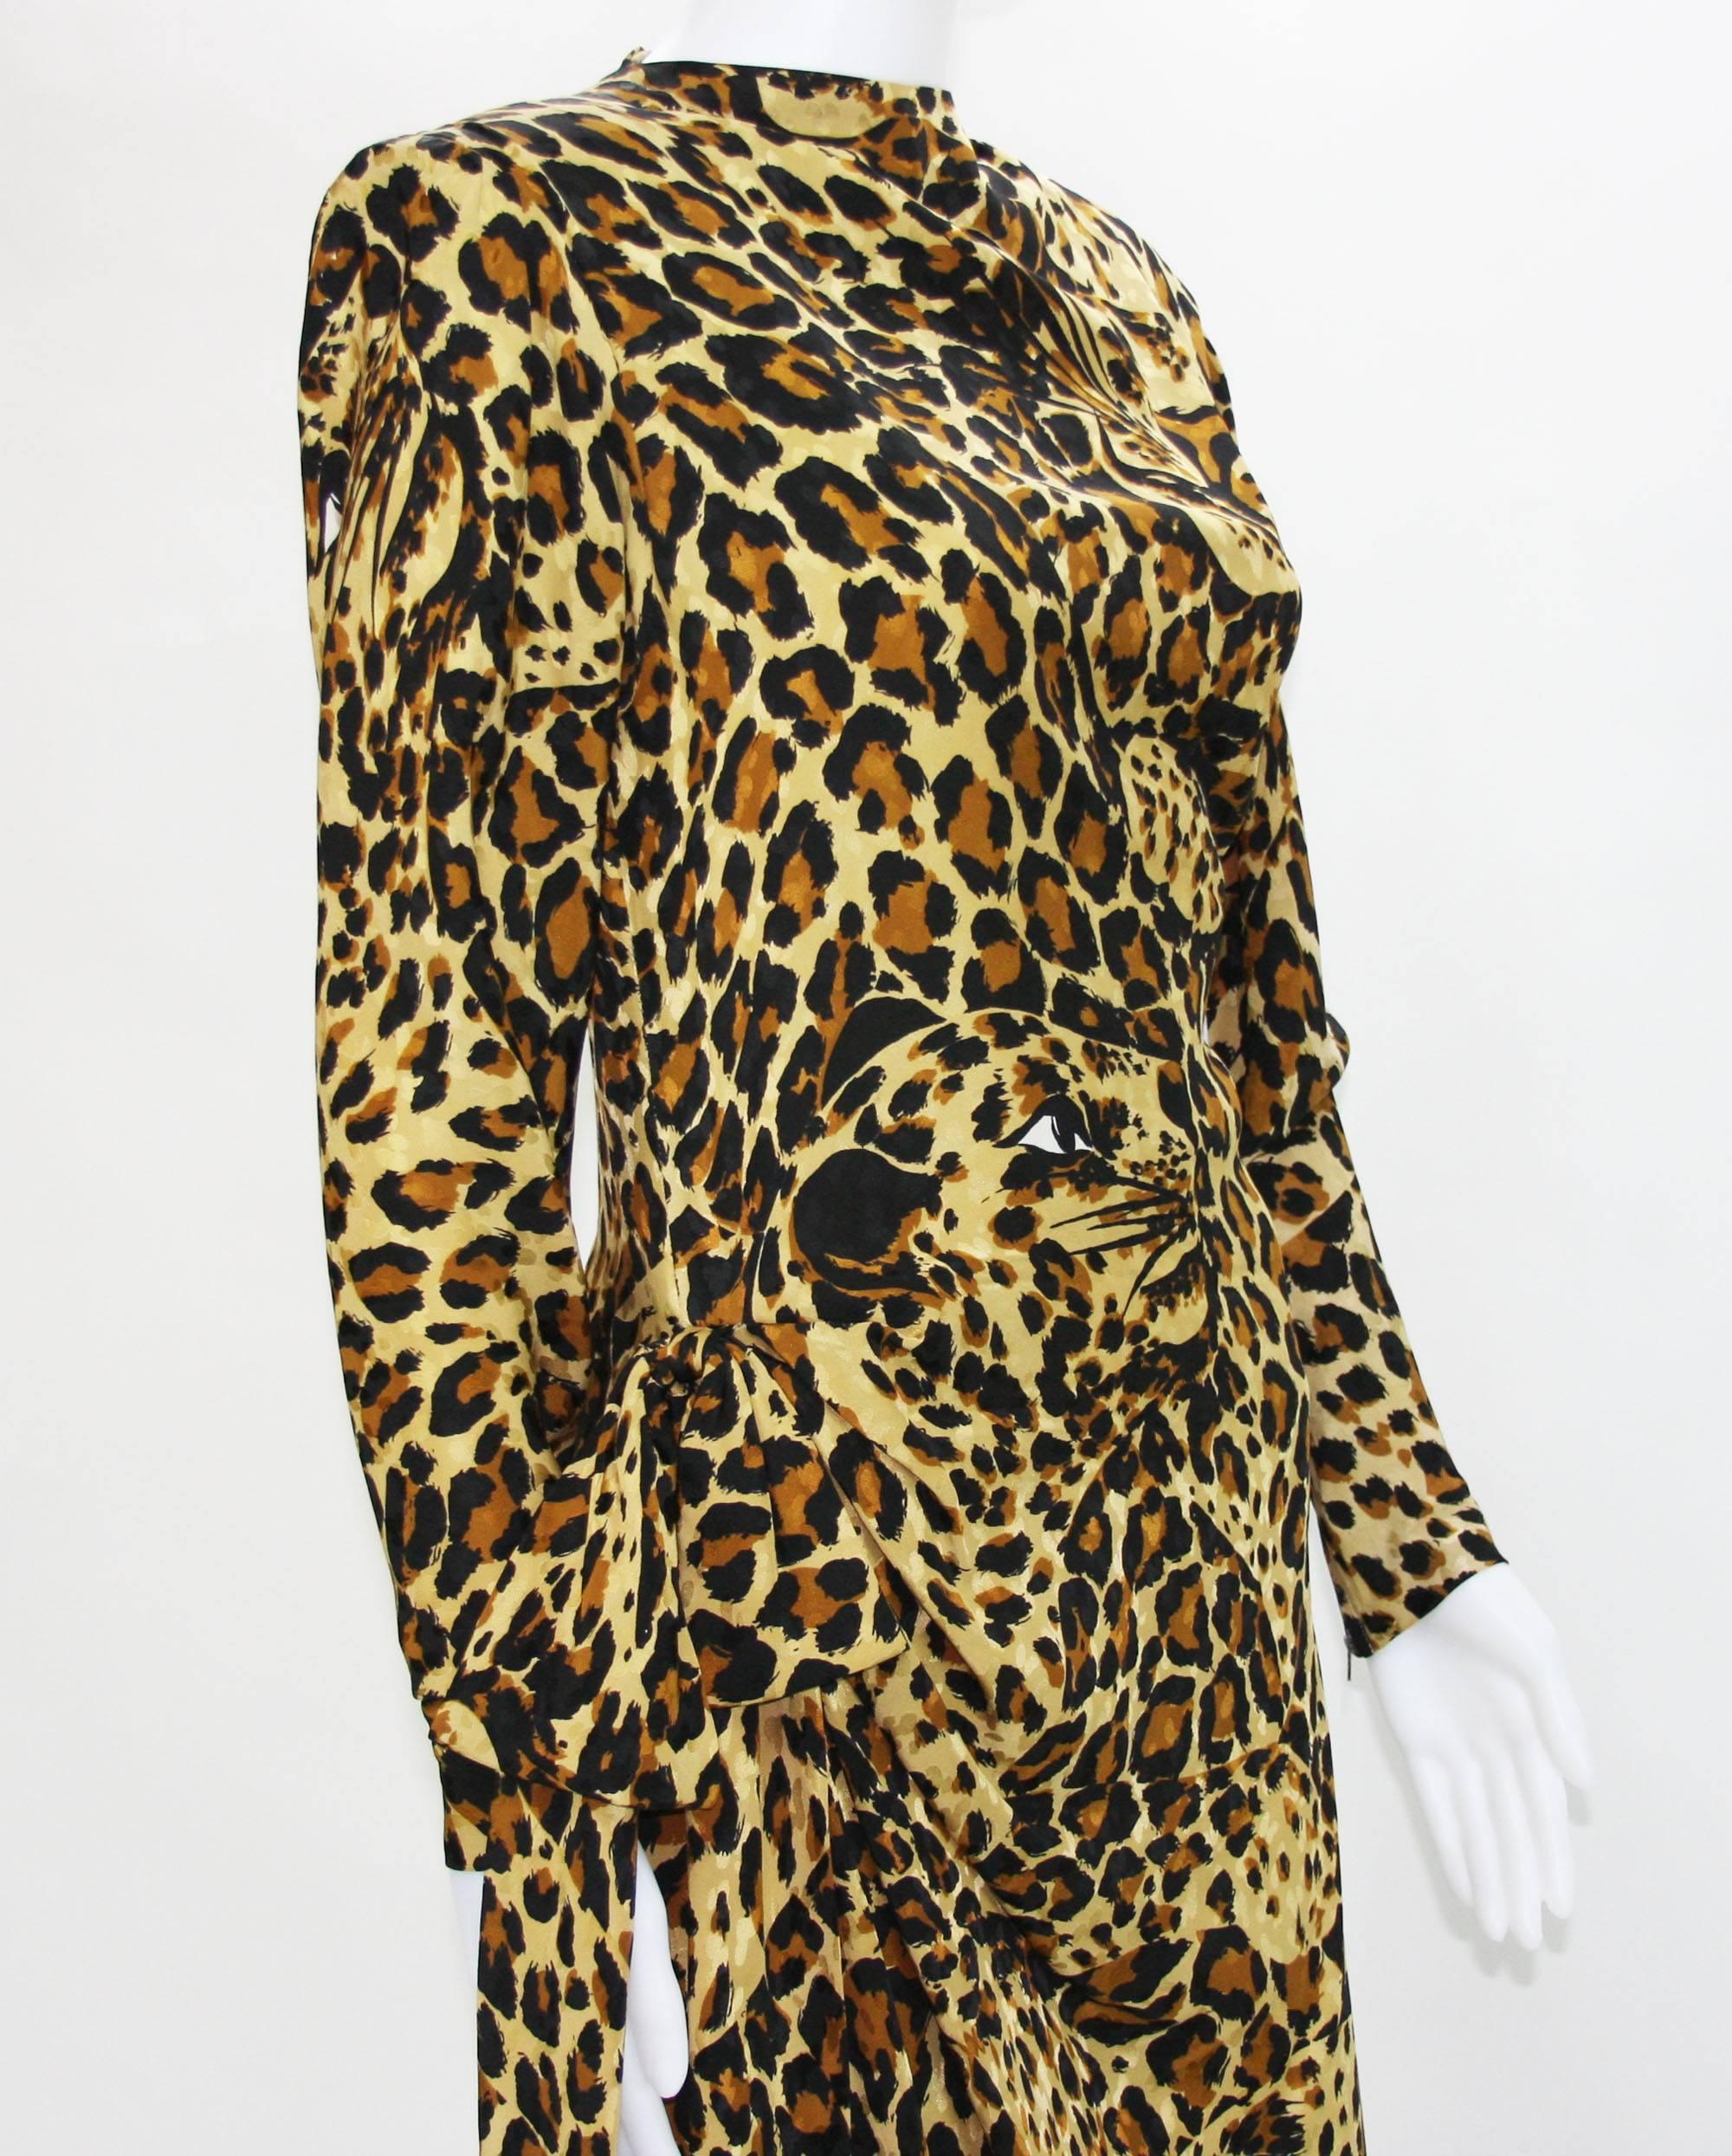 Yves Saint Laurent Runway F/W 1982/83 Leopard Silk Gown with High Slit Scarf Fr. For Sale 1